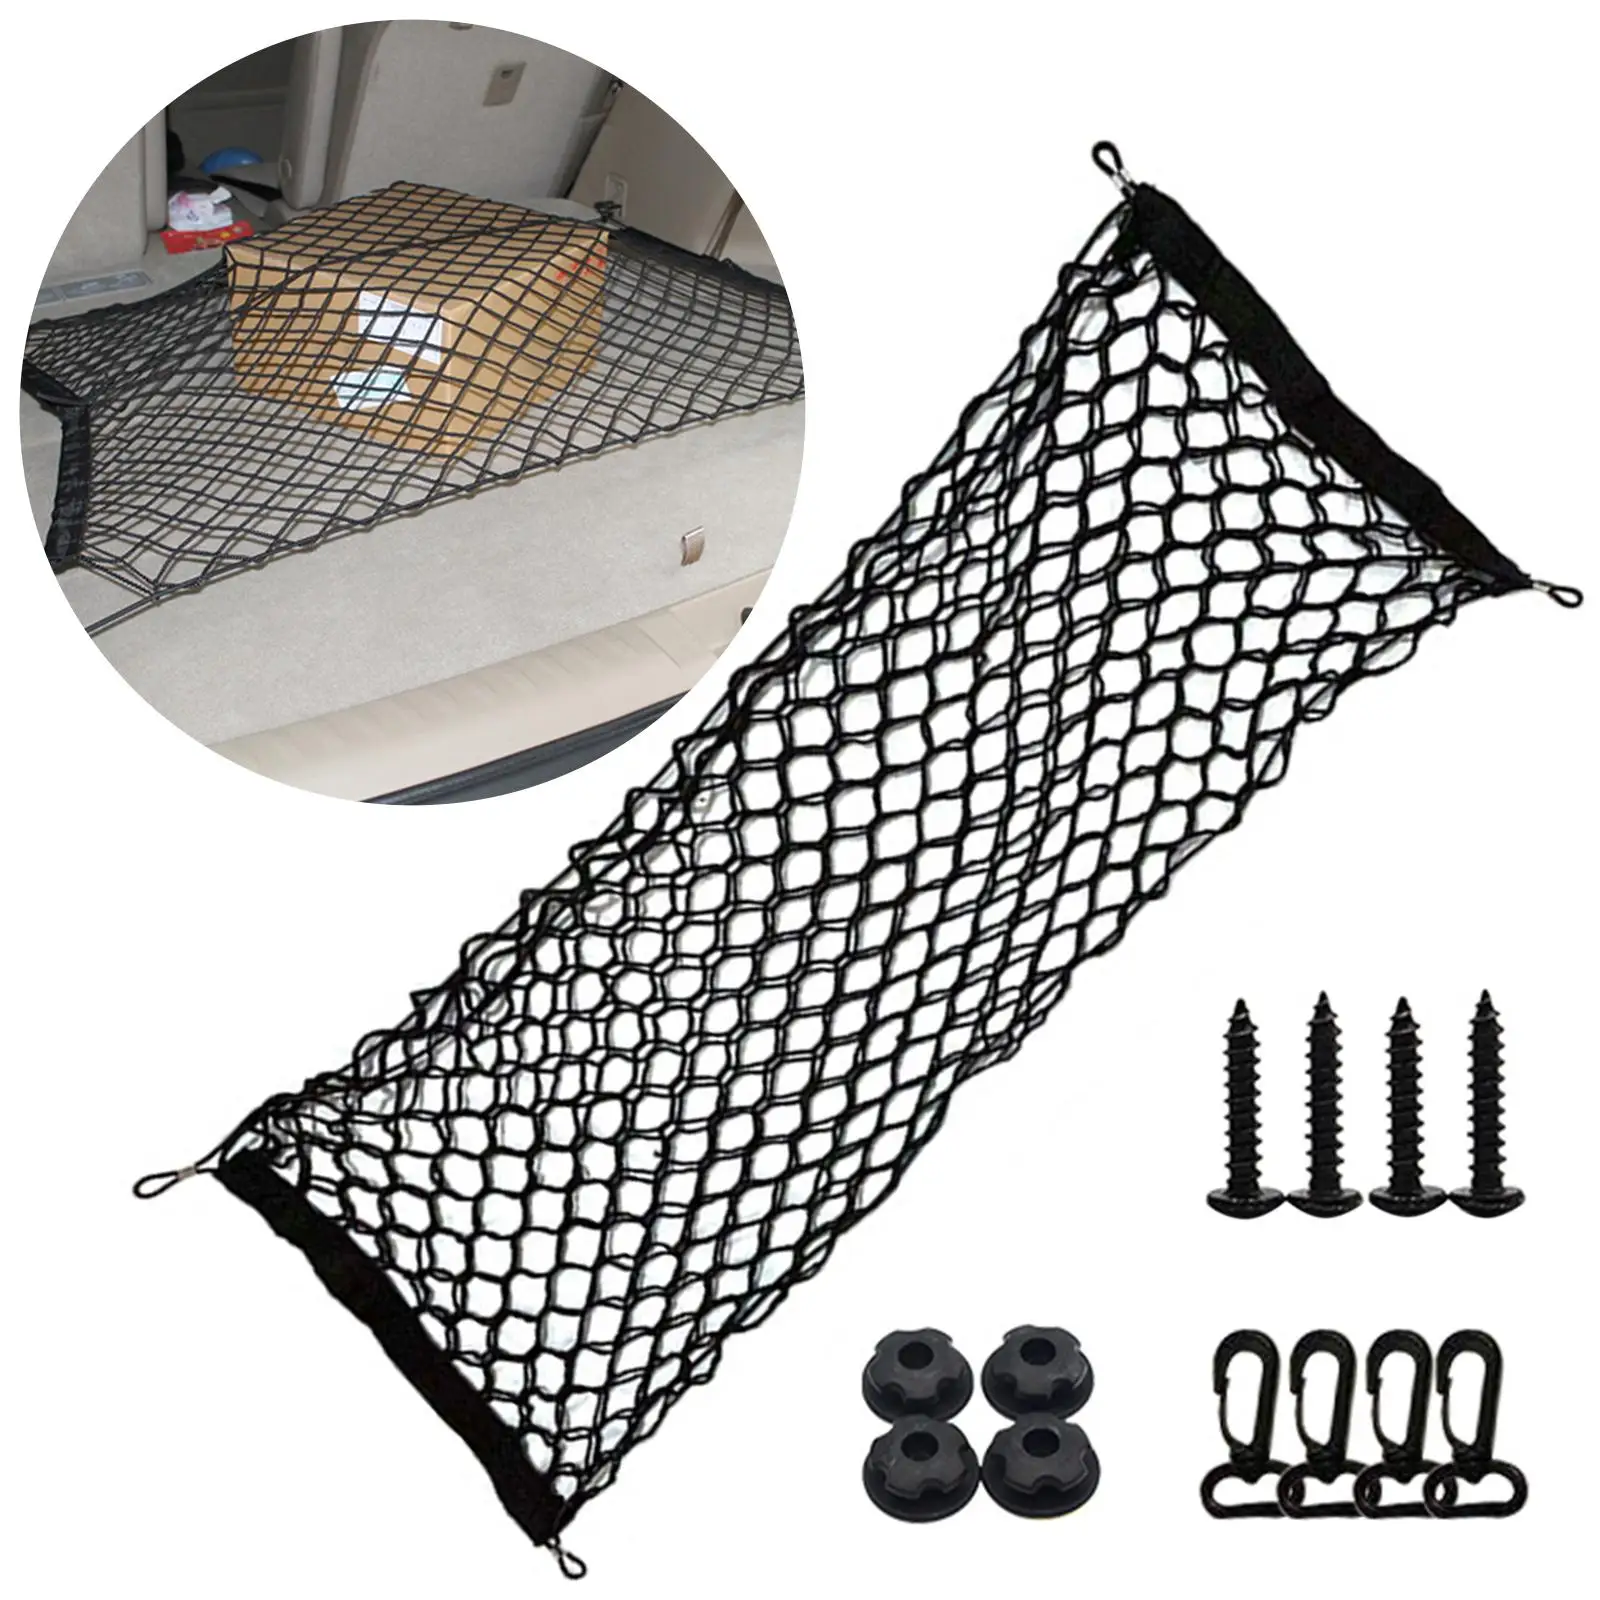  Mesh Nylon Holder  Car Boot Trunk Double-Layer Stretchable  Rear Back Organizer Storage Adjustable Fits for Car Vehicle